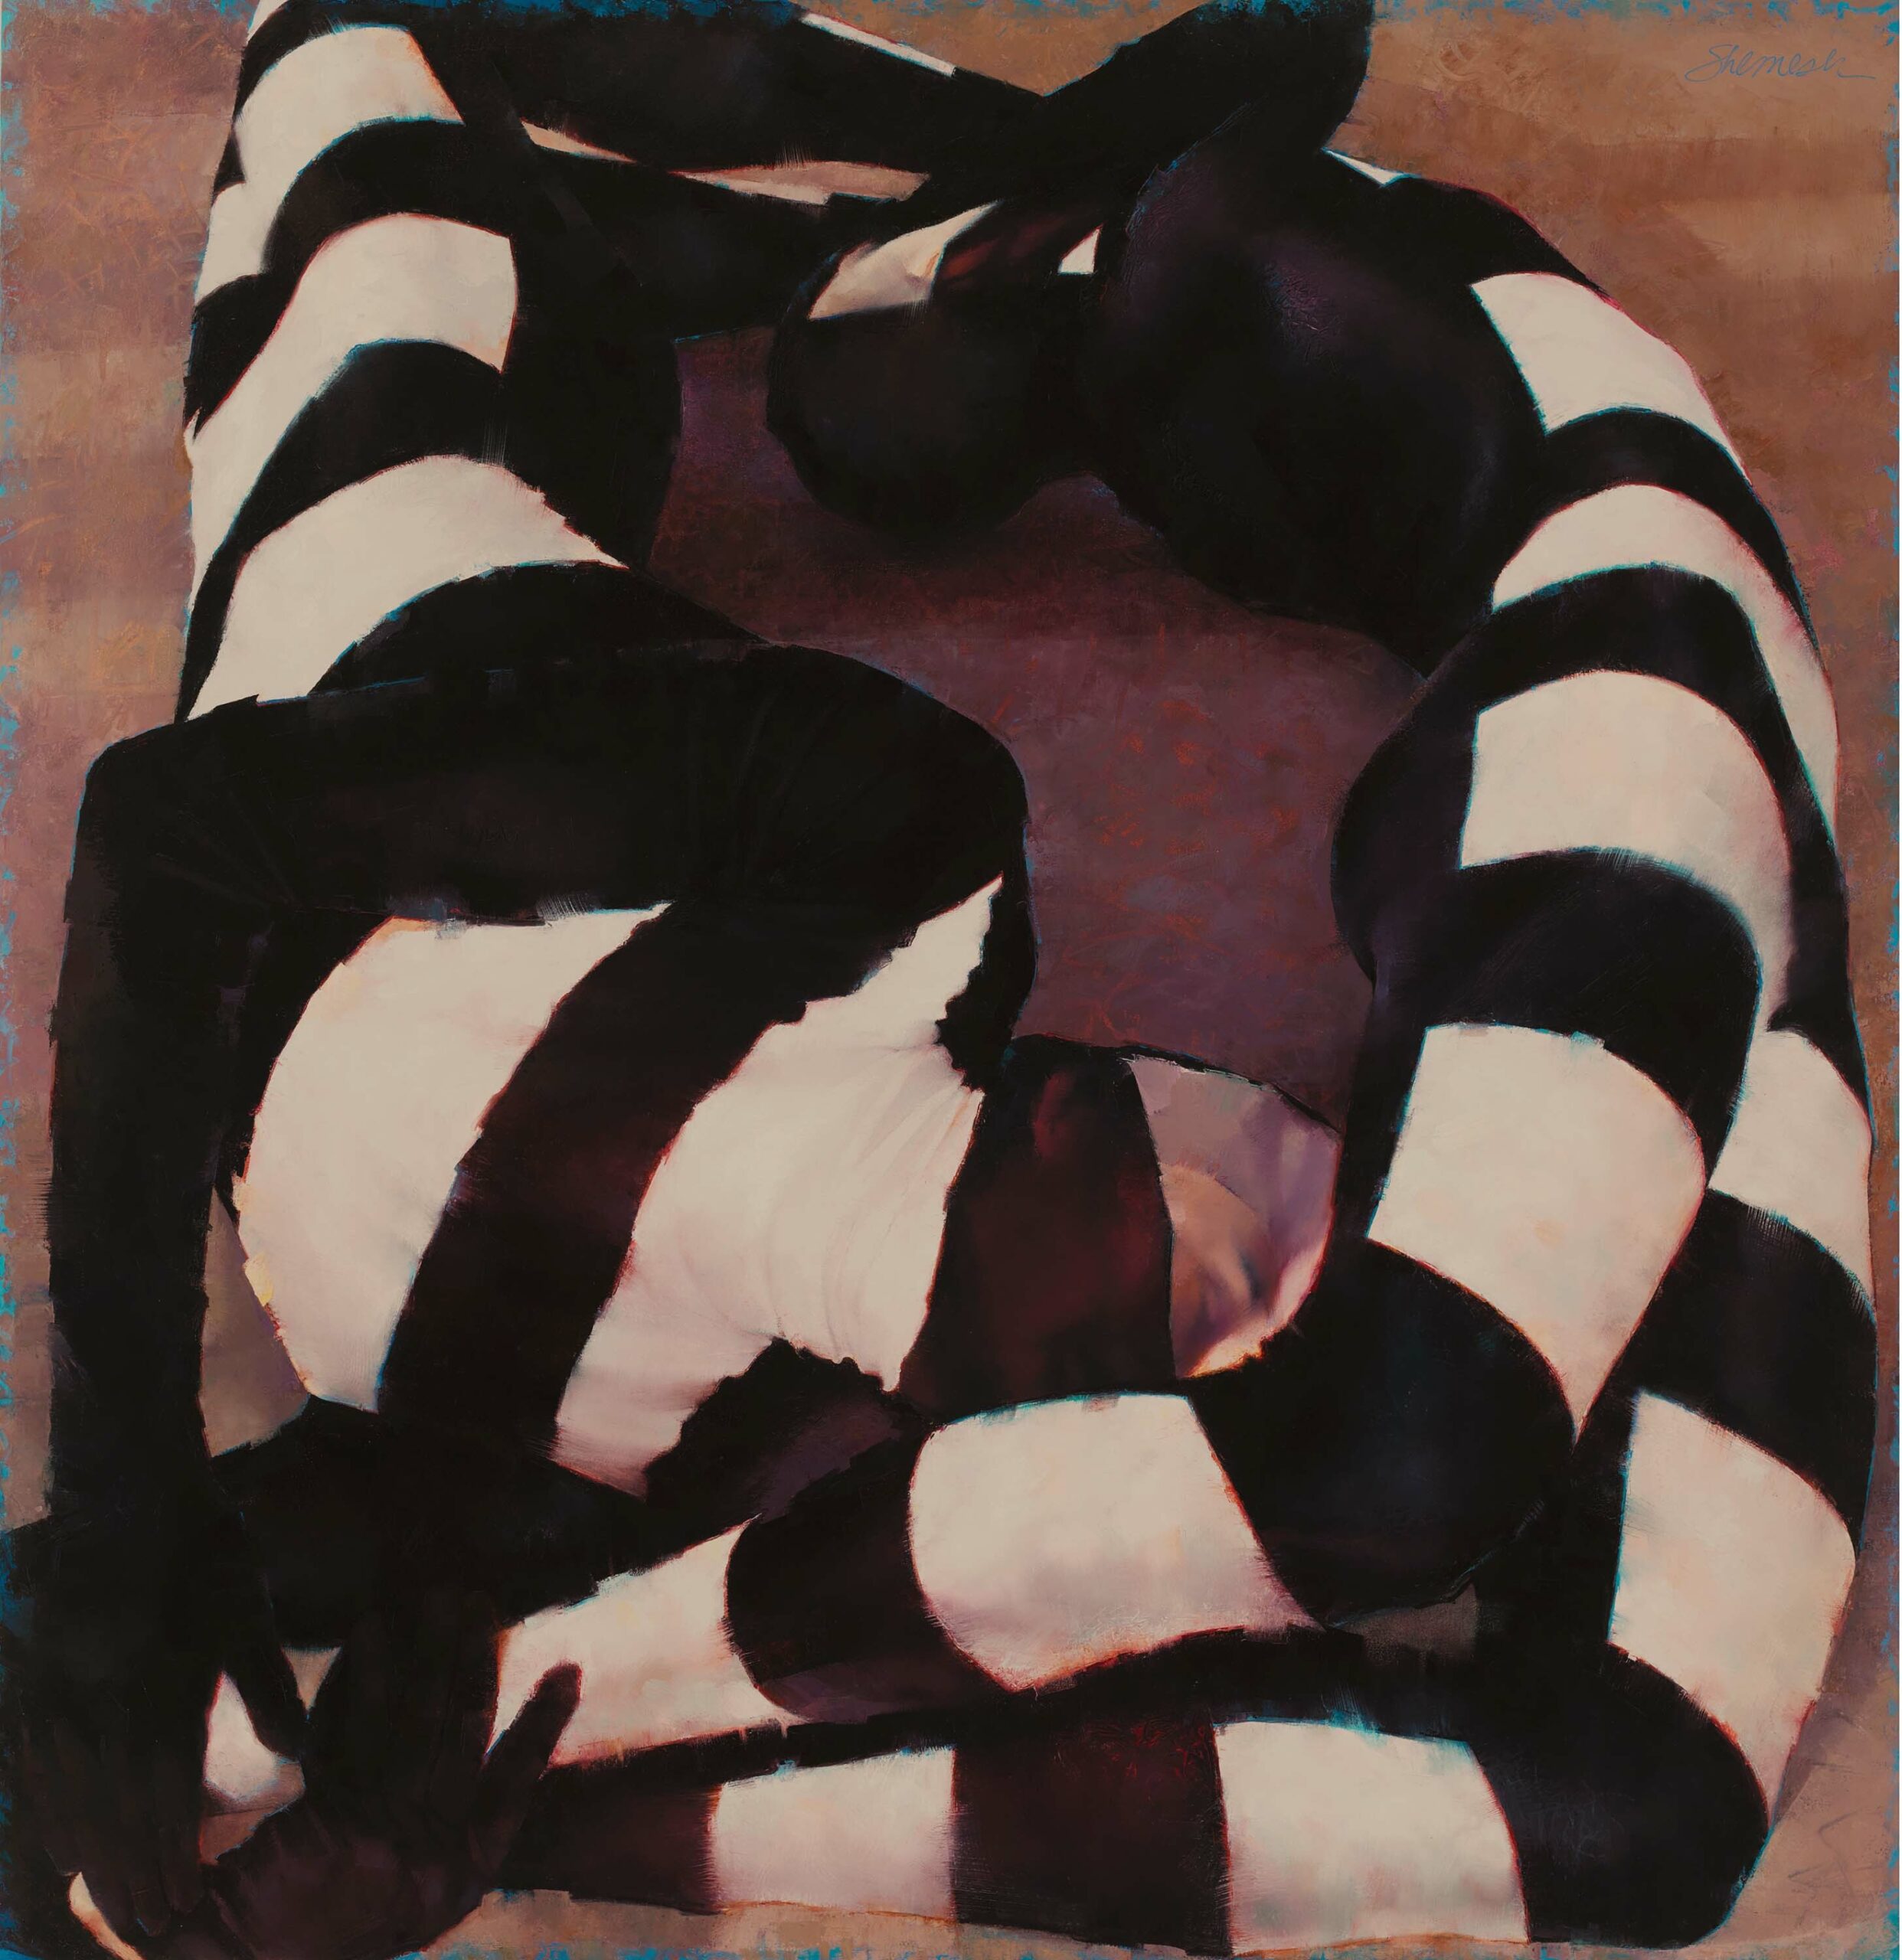 
							

									Lorraine Shemesh									Knot 2021									oil on canvas<br />
48 x 46 5/8 inches									


							